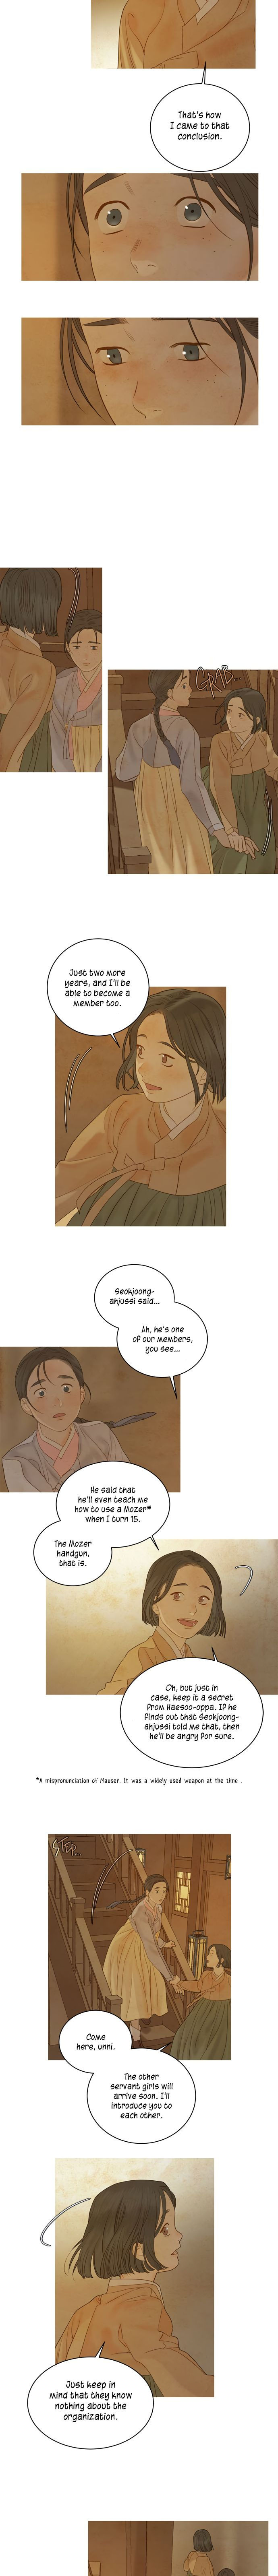 Gorae Byul - The Gyeongseong Mermaid - Chapter 30 Page 5